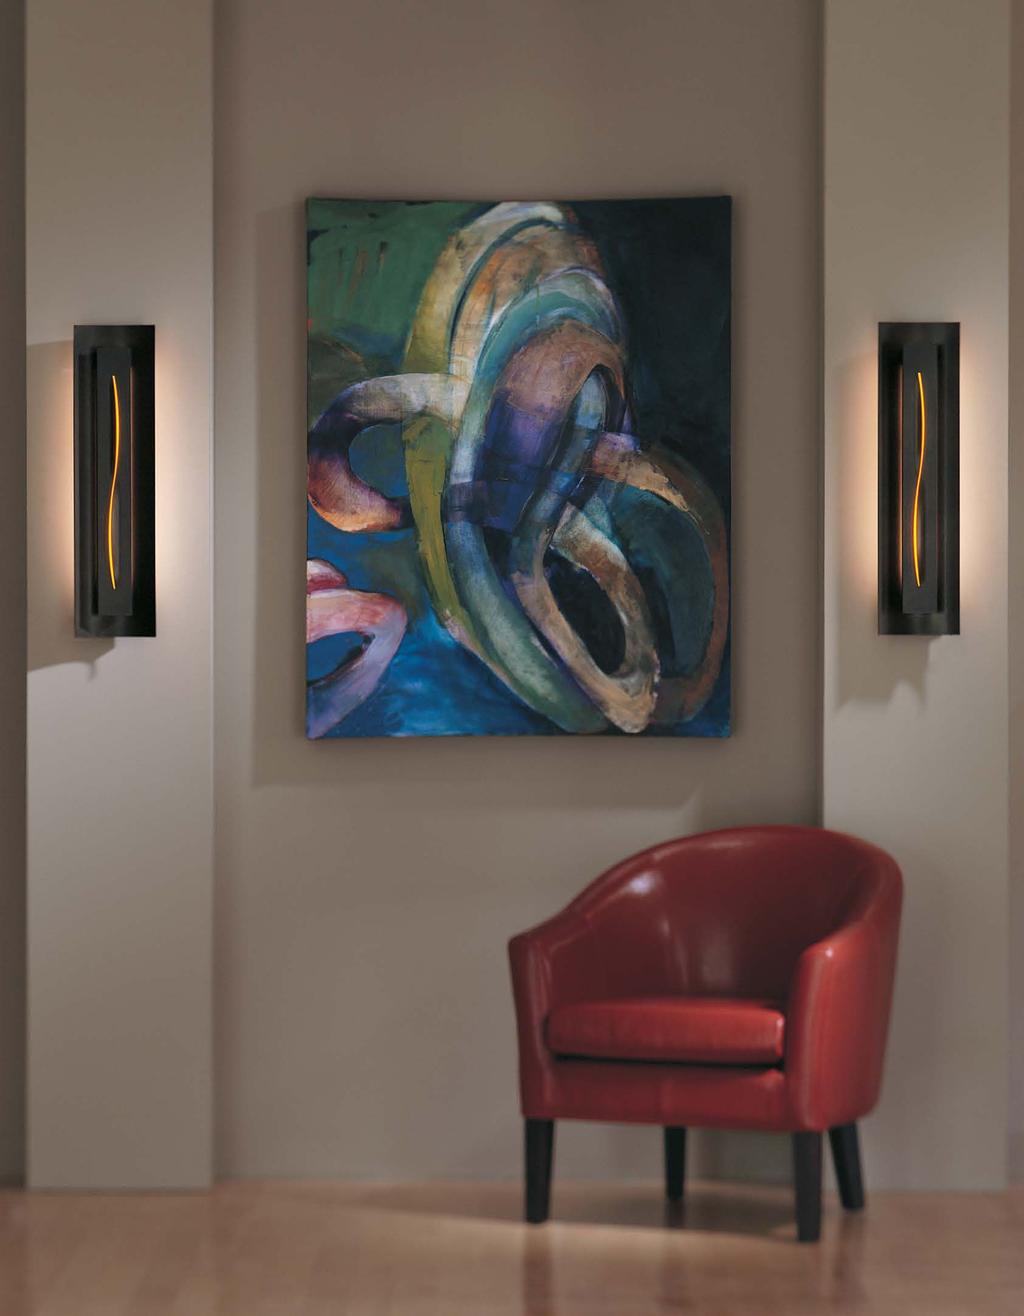 STANDARD-SIZED GALLERY SCONCES ARE AVAILABLE IN FLUORESCENT OR